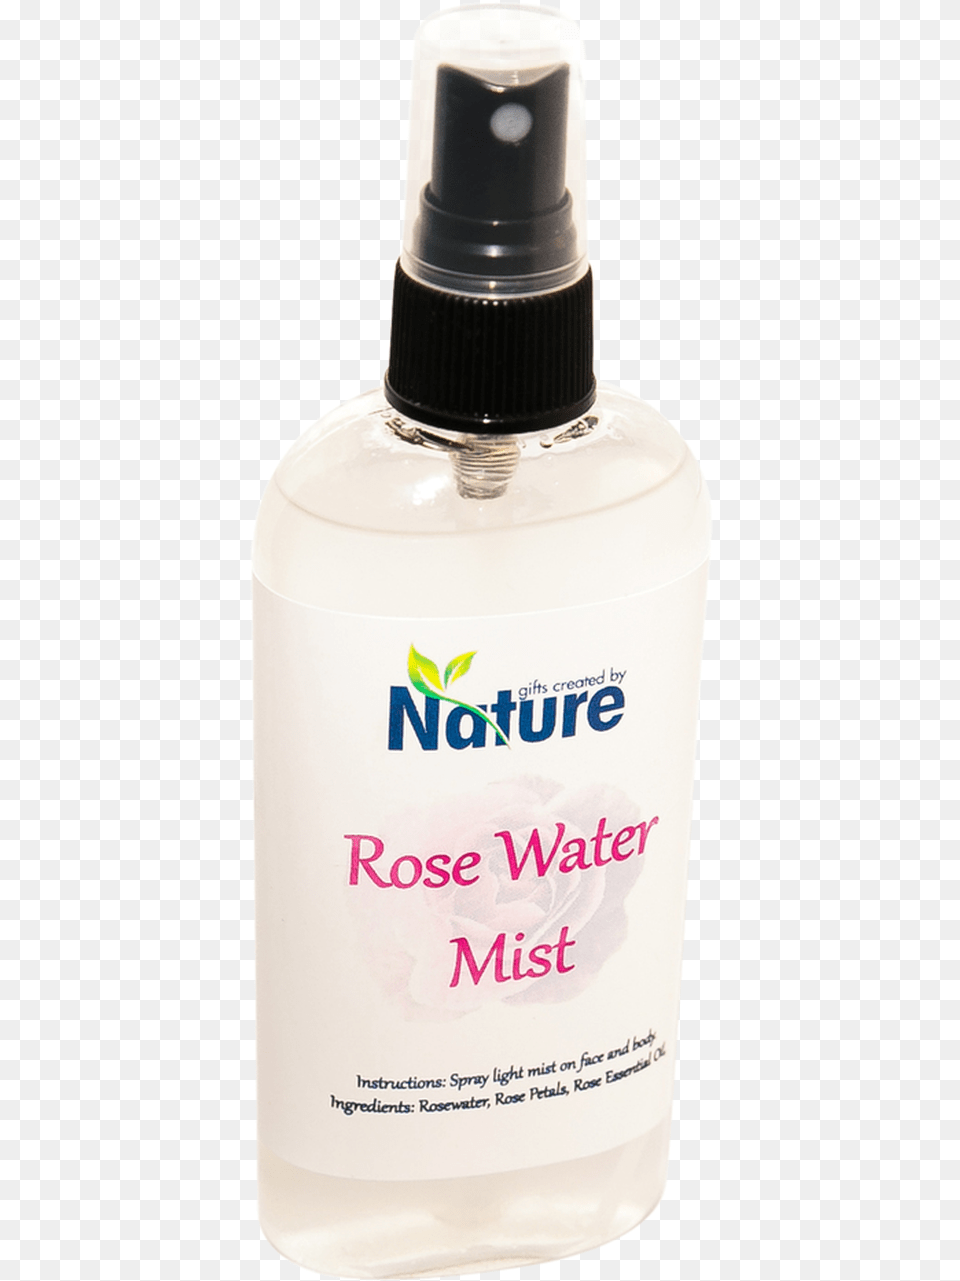 Rose Water Mist Perfume, Bottle, Cosmetics, Lotion Png Image